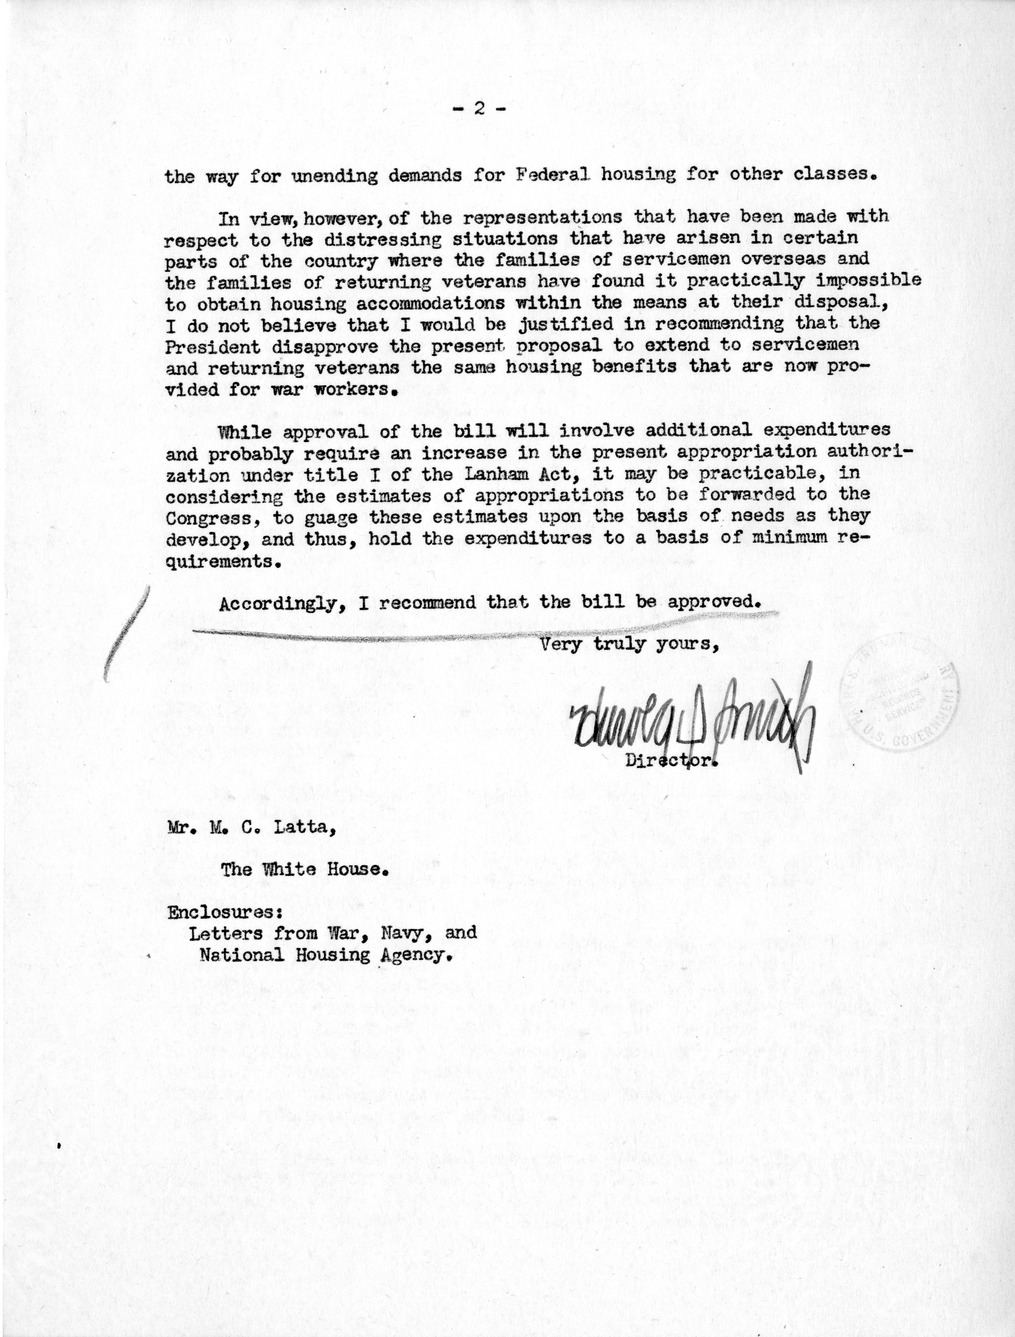 Memorandum from Harold D. Smith to M. C. Latta, H.R. 3322, To Amend An Act to Expedite the Provisions of Housing in Connection With National Defense, Approved October 14, 1940, as Amended, with Attachments